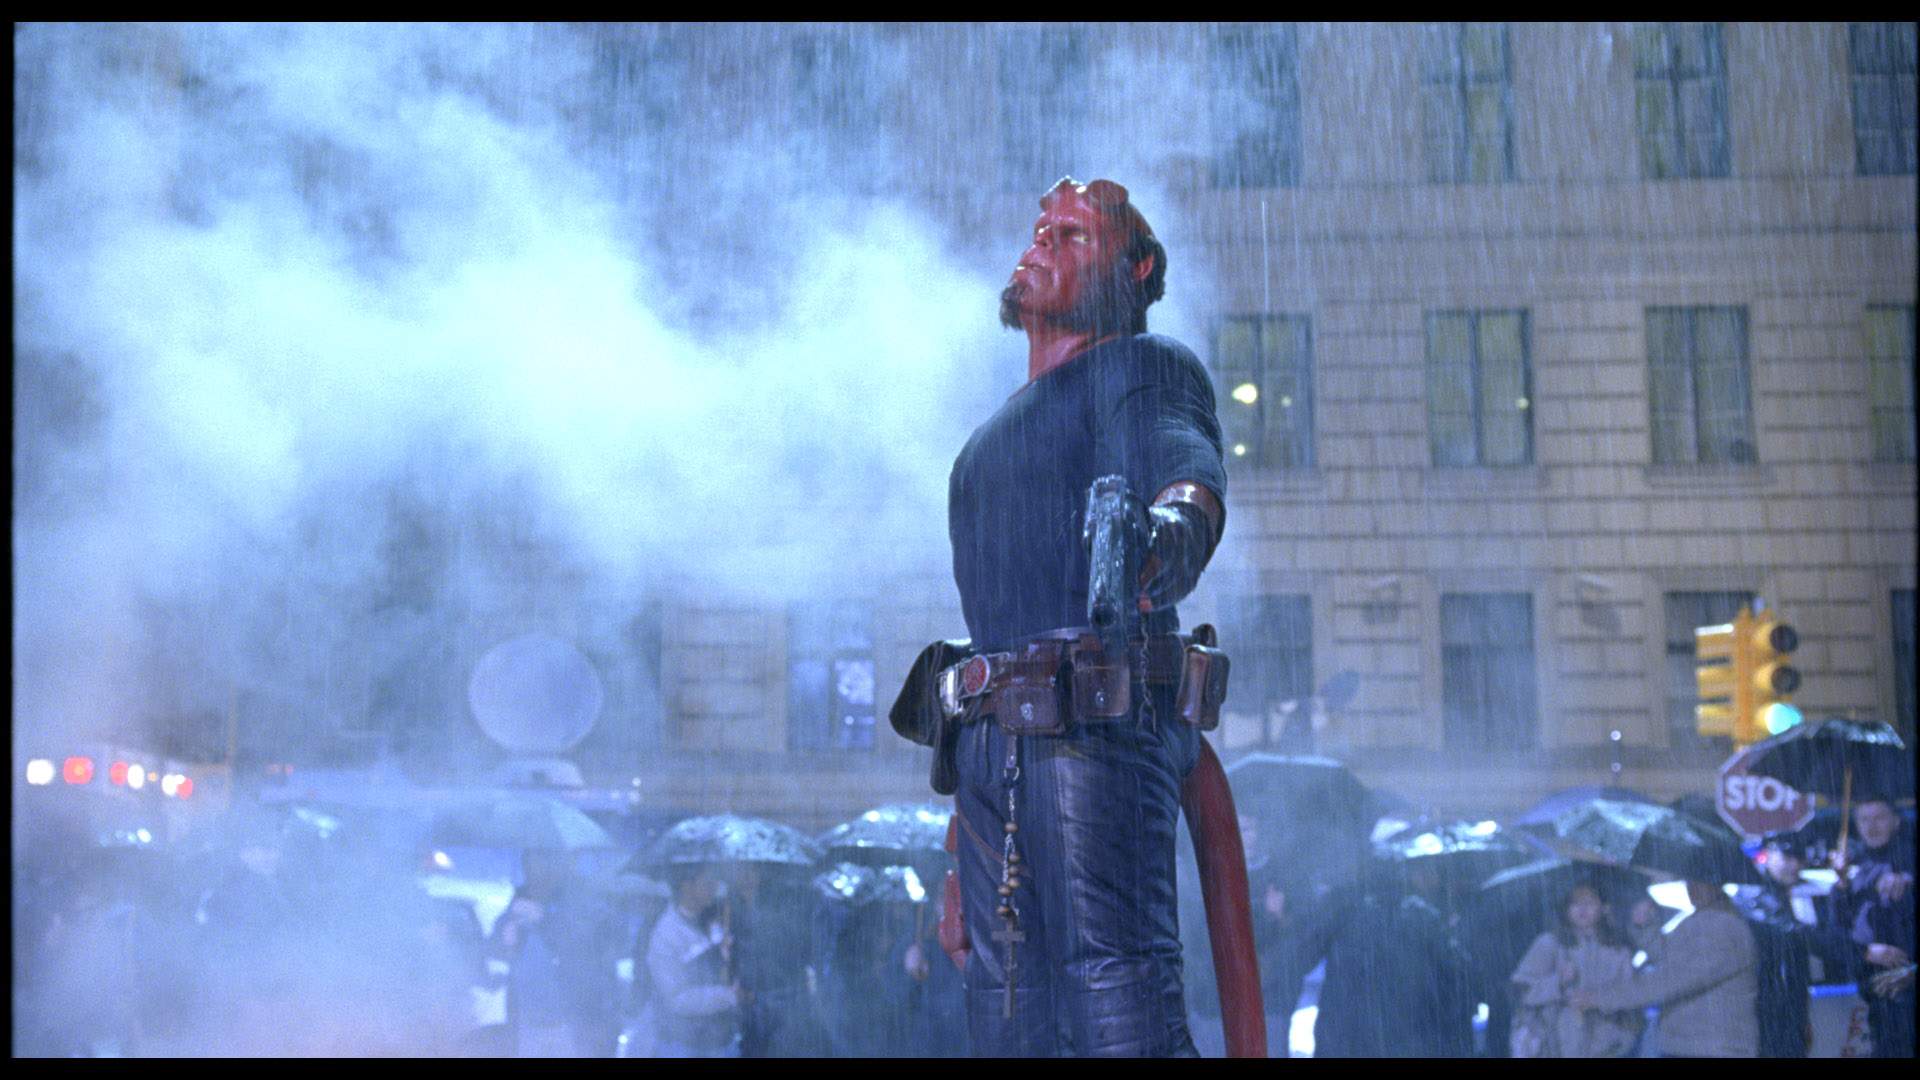 Ron Perlman as Hellboy in Universal Pictures' Hellboy II: The Golden Army (2008)